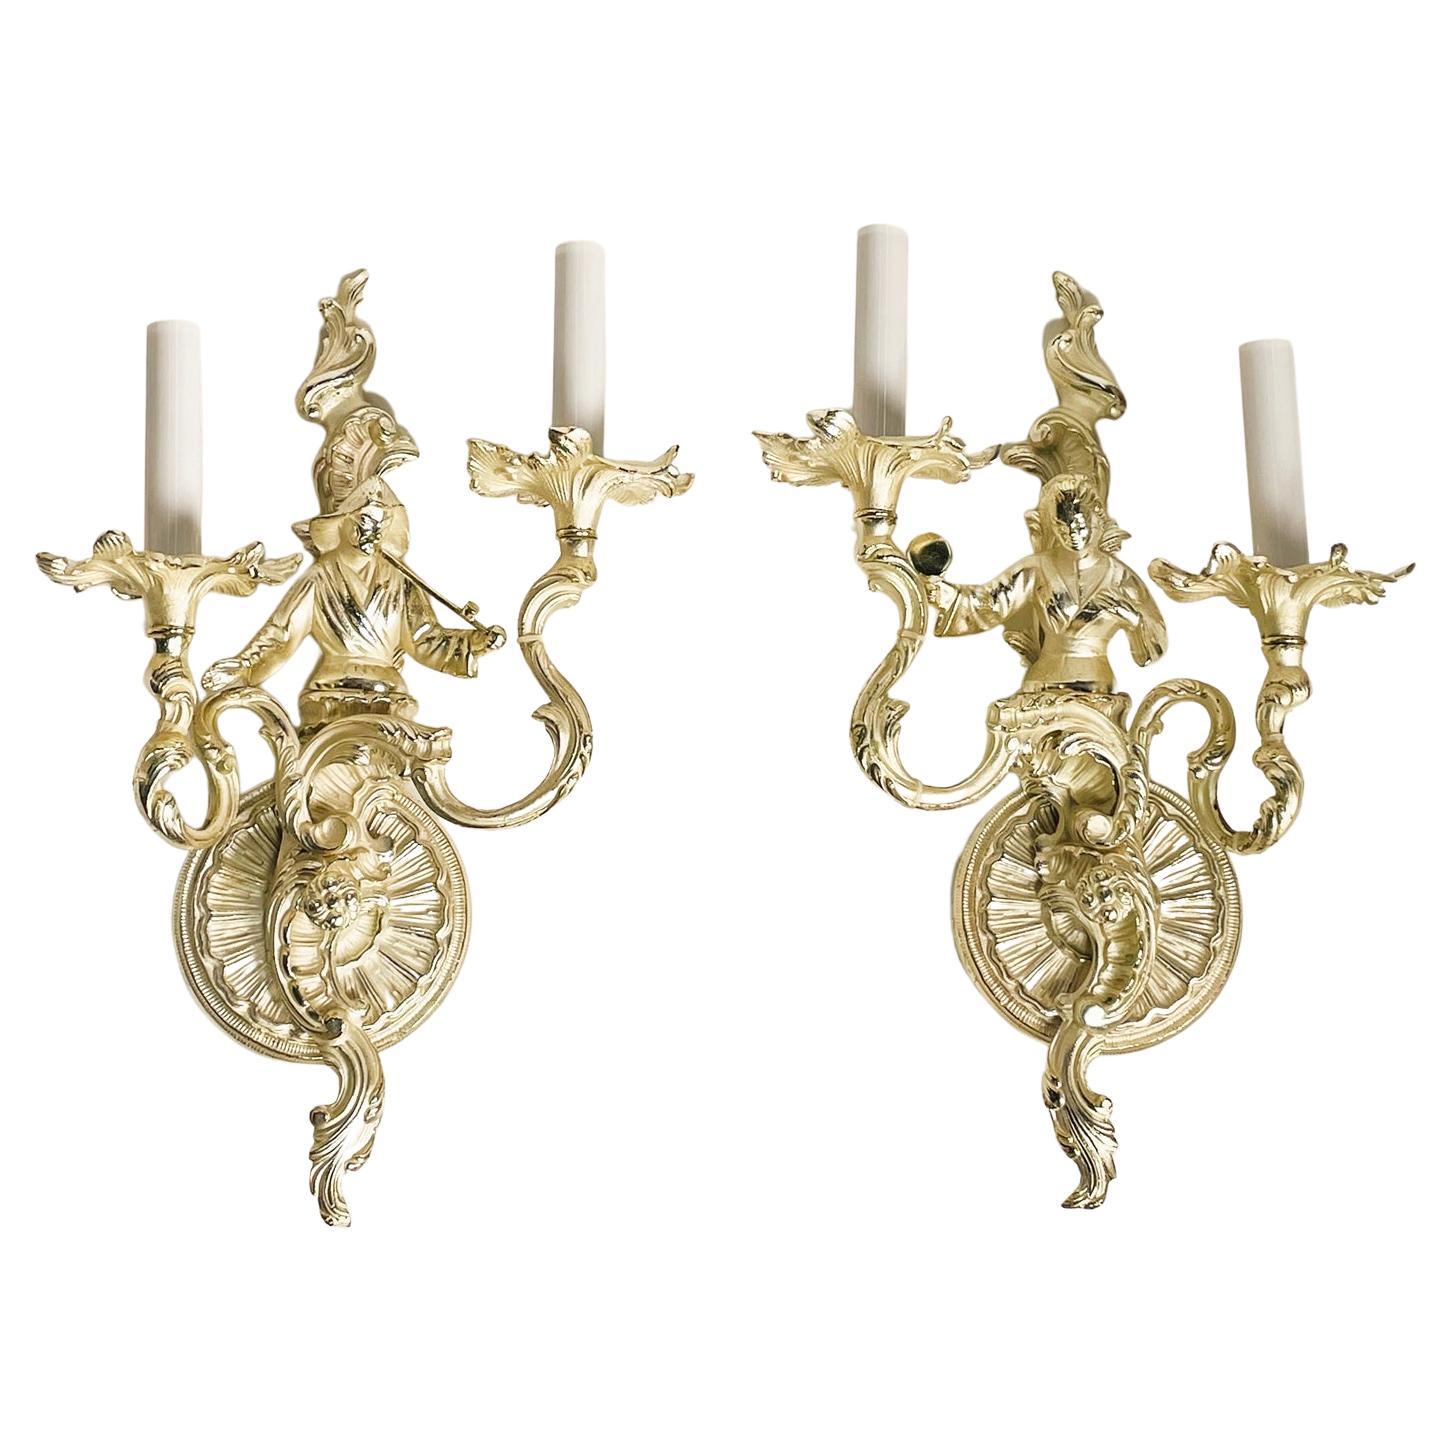 Pair of Asian Style Wall Sconces in Silver Finish